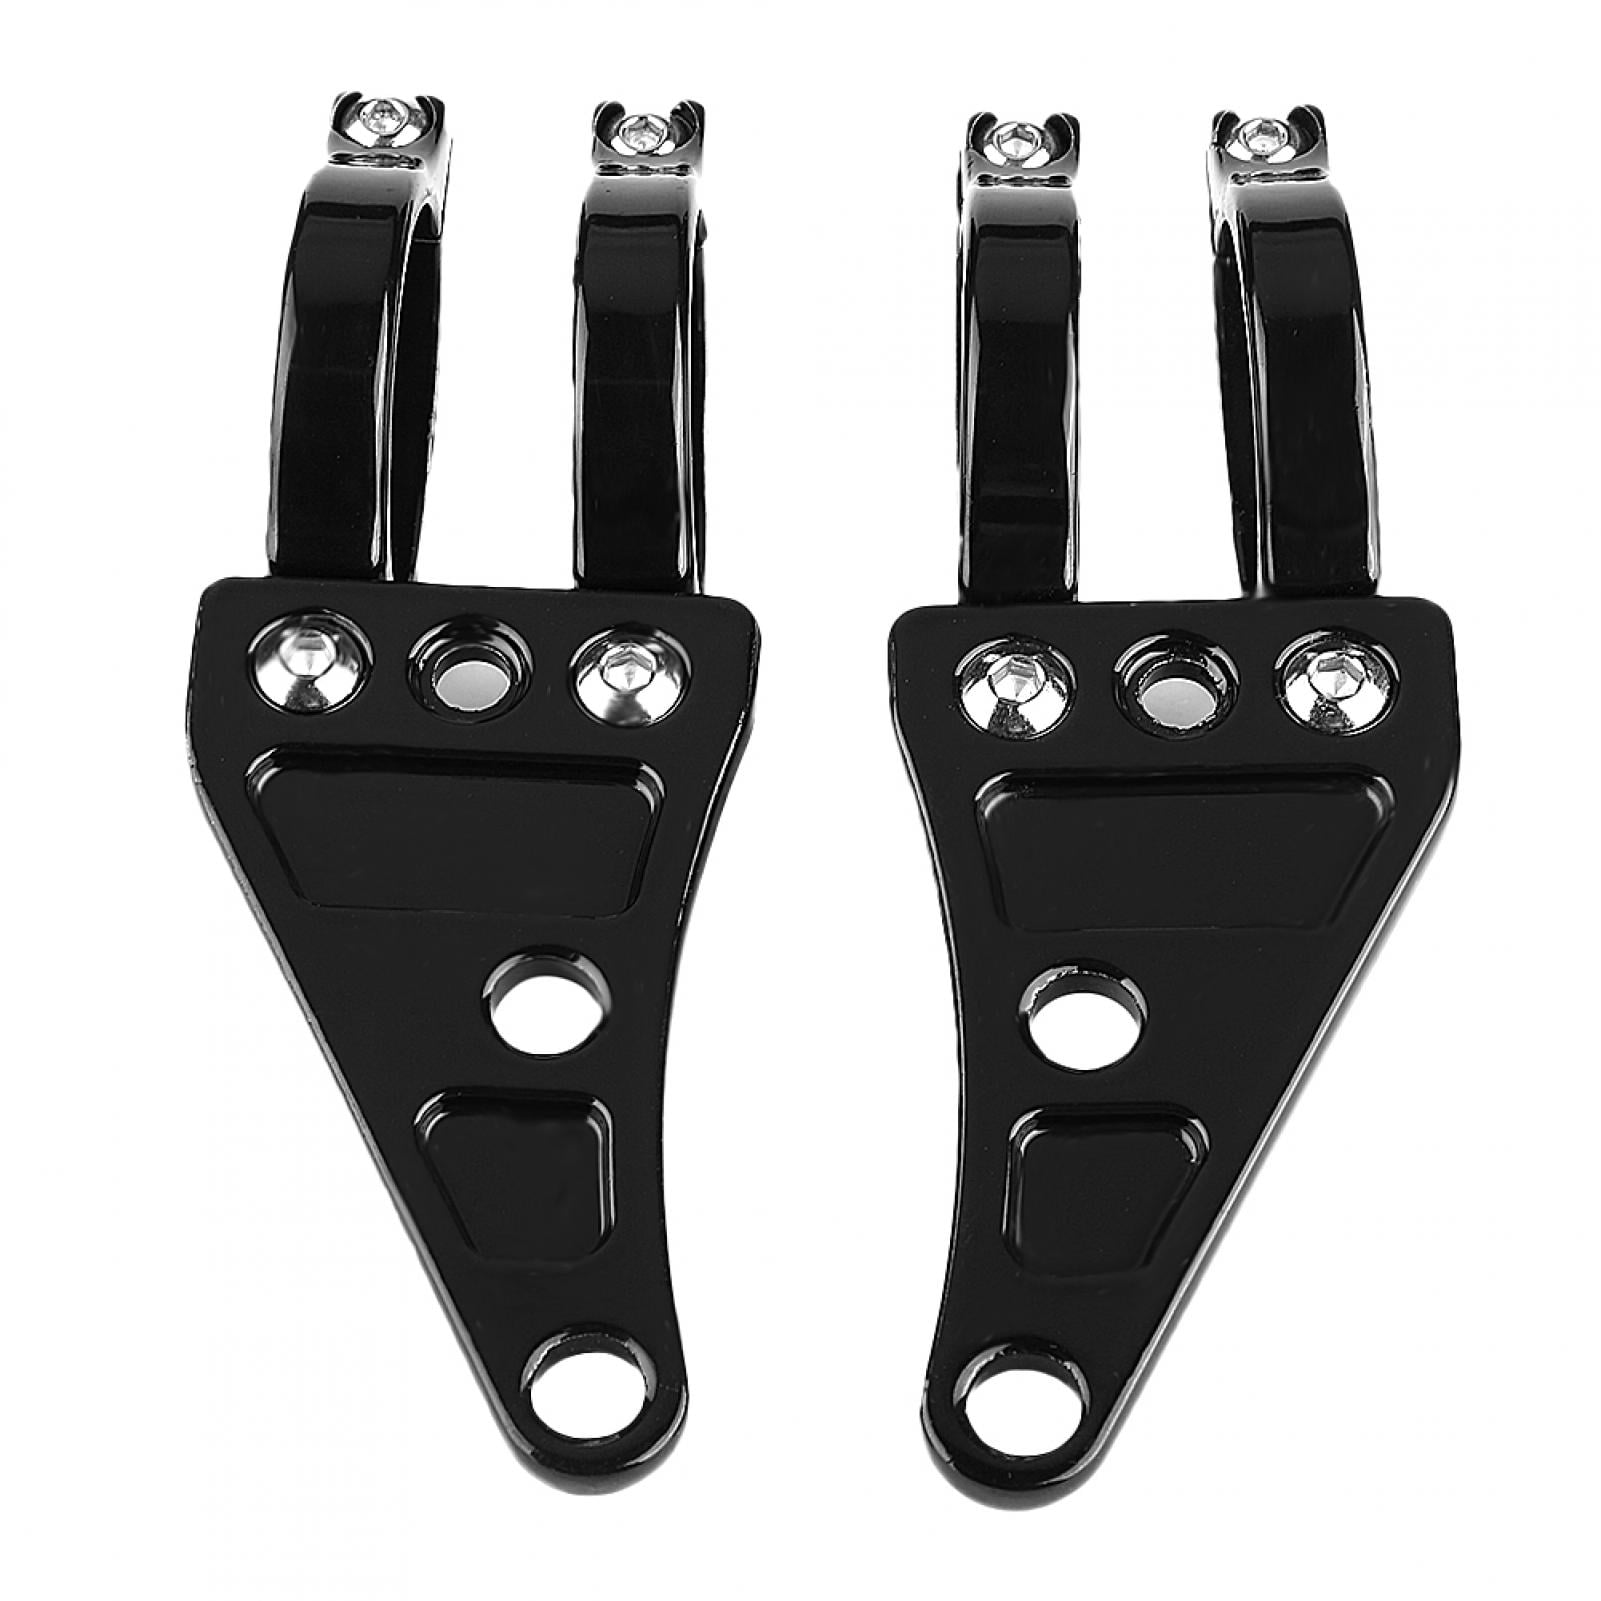 Motorcycle Headlight Mount-2pcs 35-43mm Headlight Mount Bracket Clamps Head Lamp Holder Fork for Motorcycle